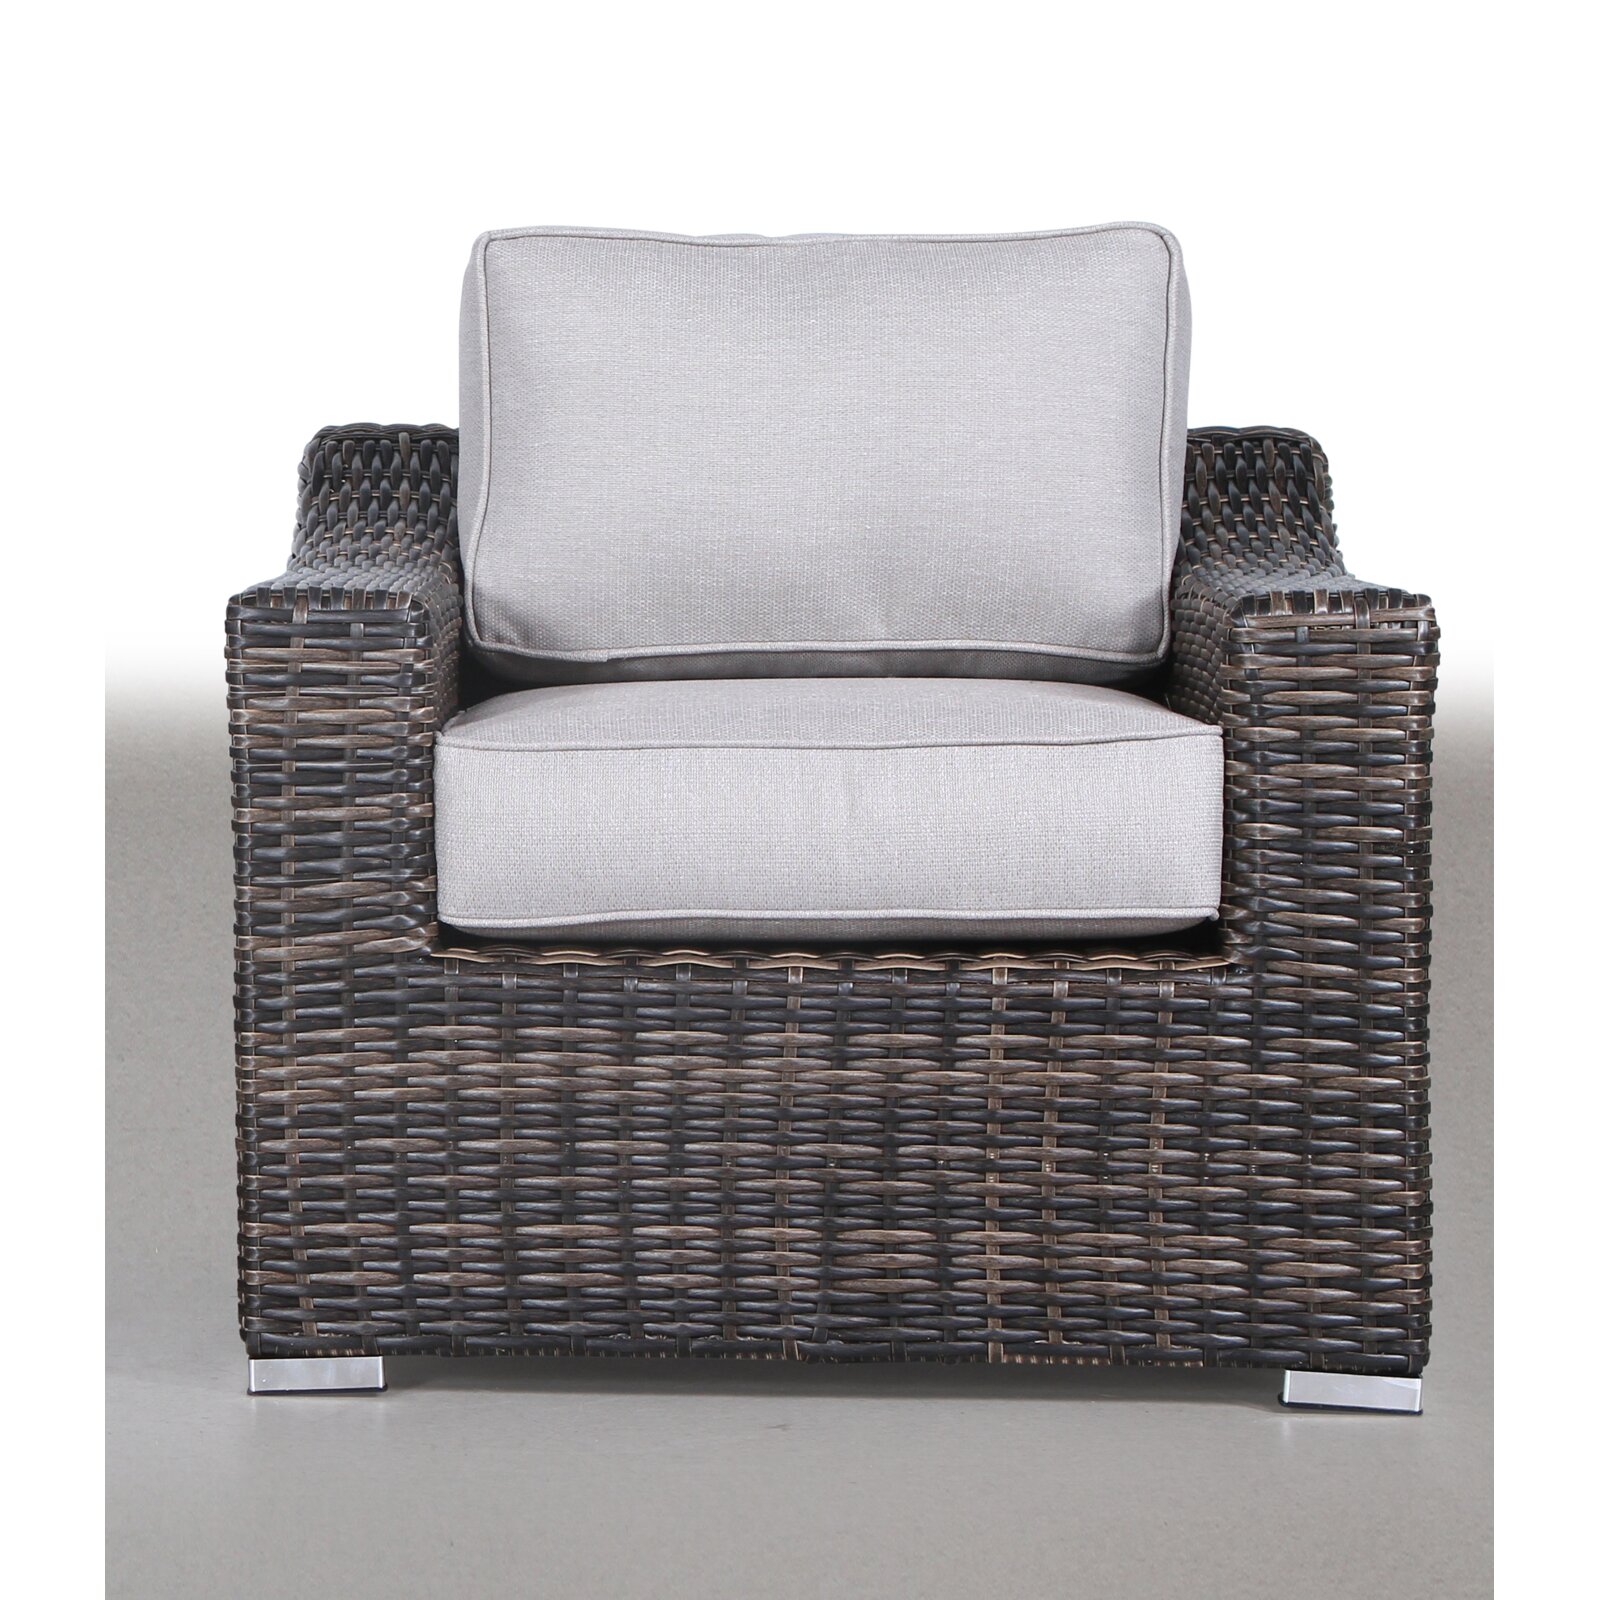 Wynona Club Patio Chair with Cushions, : 31 lb., Outer Frame Material: Wicker/Rattan - image 2 of 4